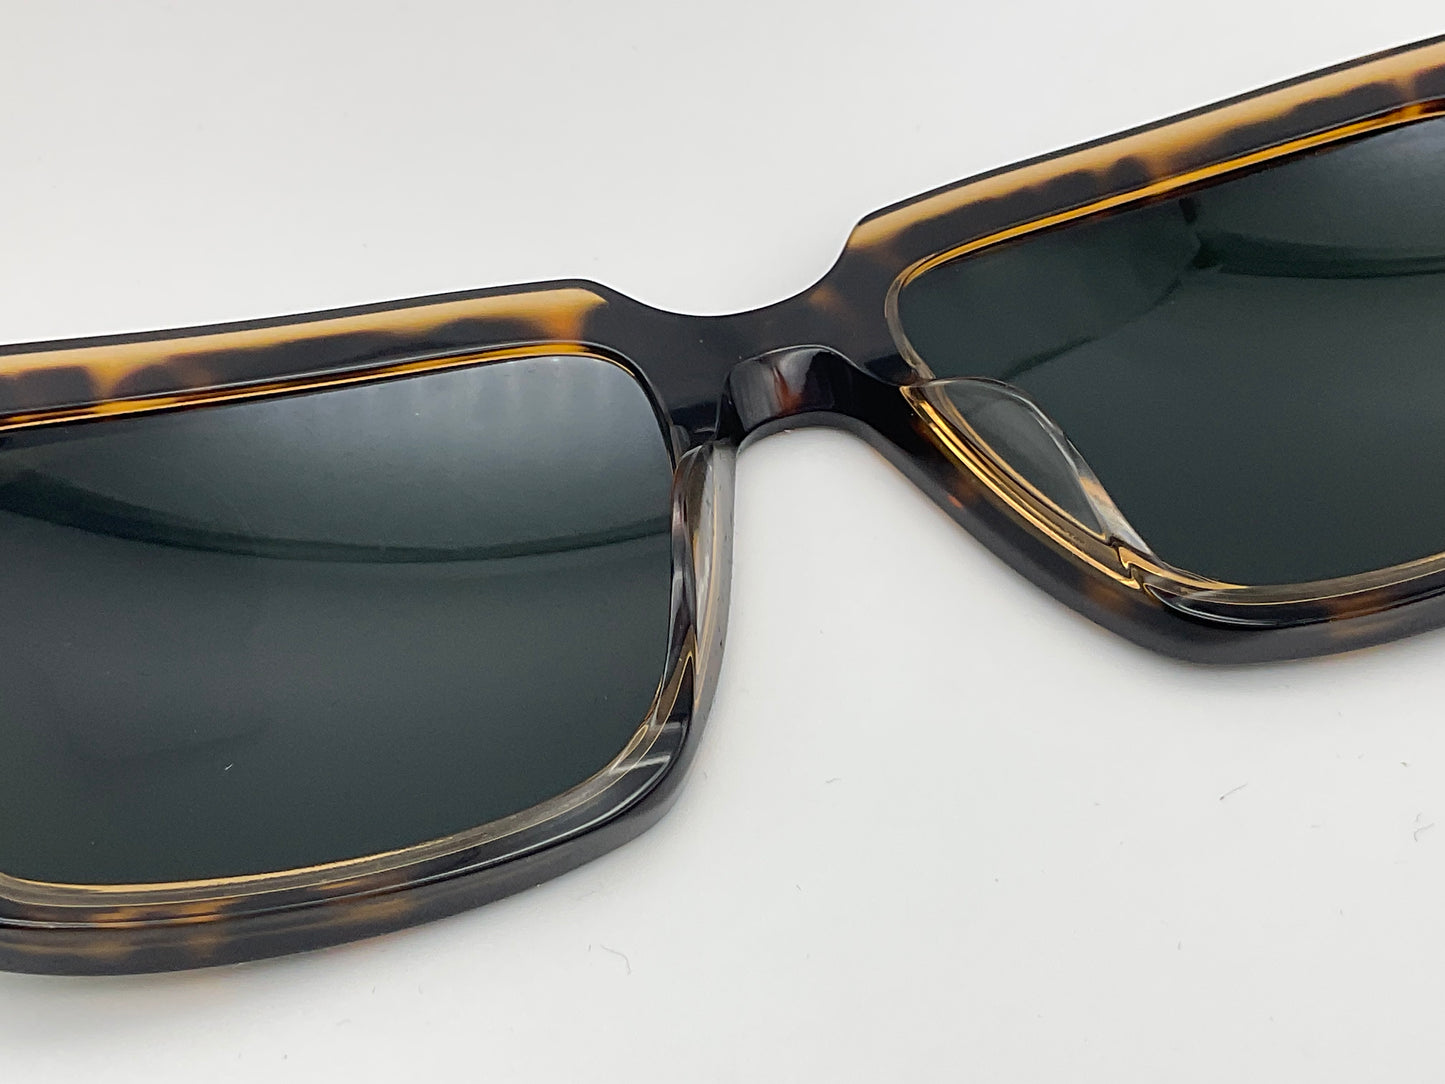 Ray-Ban Inverness RB 2119 55mm Stripped Havana/Green 954/31